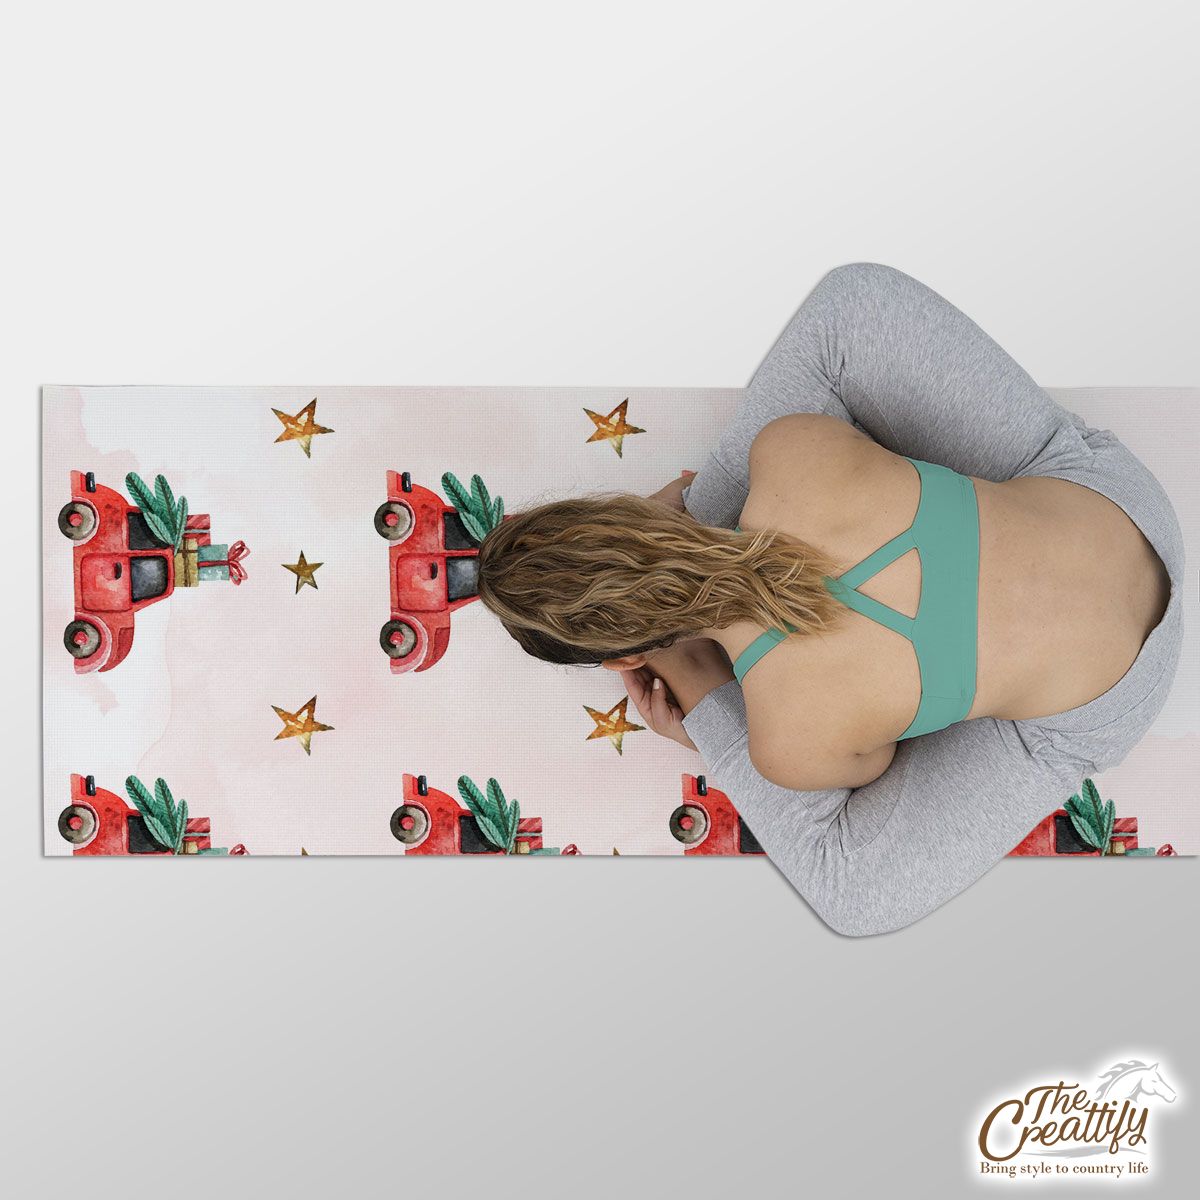 Watercolor Christmas Car With Christmas Gifts Star Pattern Yoga Mat